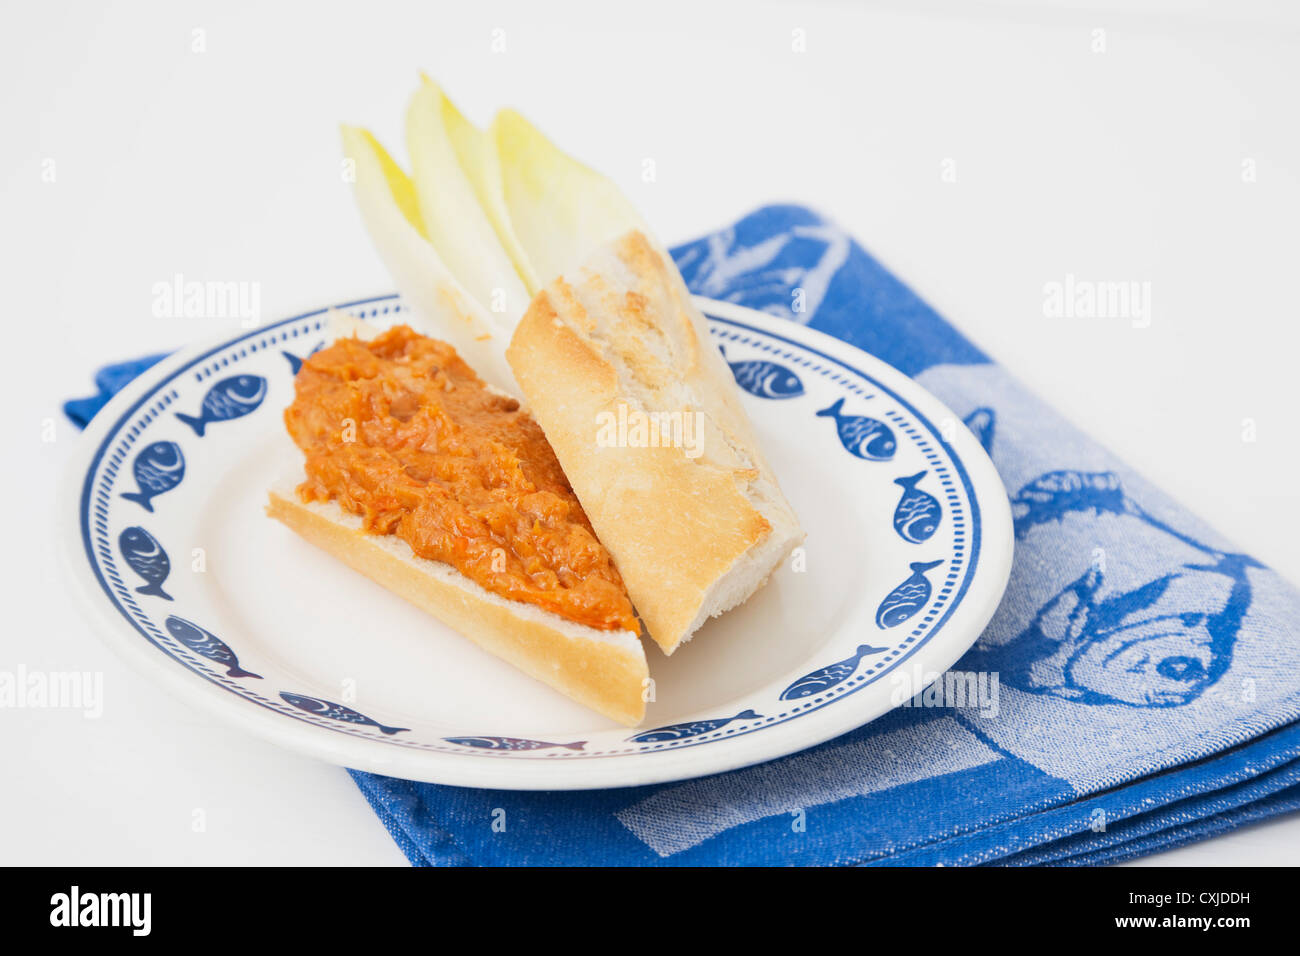 Baguette sandwich with tuna and tomato spread on plate Stock Photo